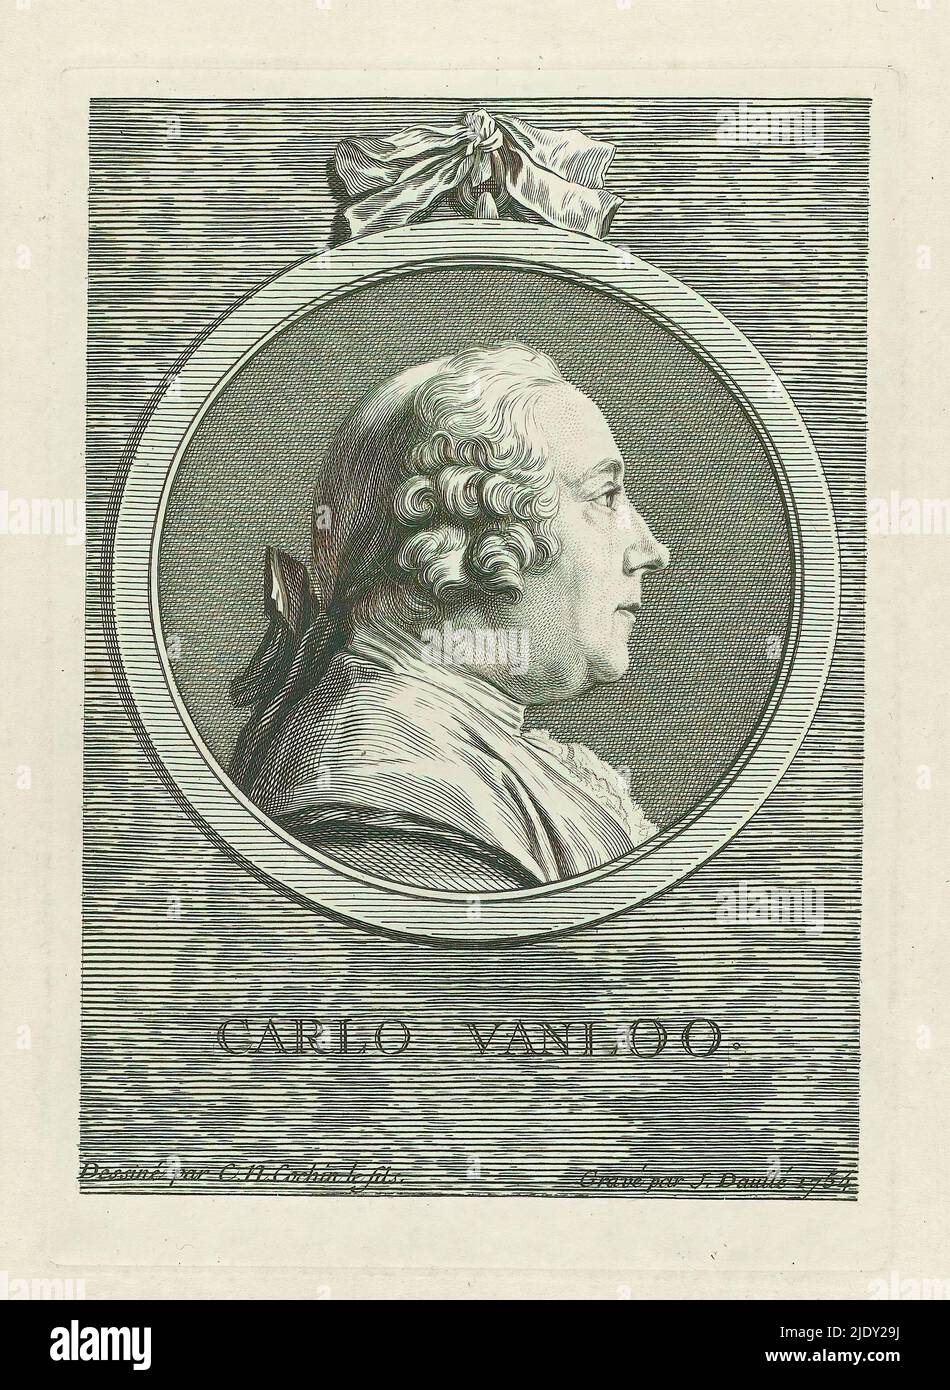 Portrait of Carle van Loo, Carlo Vanloo. (title on object), print maker: Jean Daullé, (mentioned on object), after drawing by: Charles Nicolas Cochin (II), (mentioned on object), France, 1754, paper, engraving, height 188 mm × width 130 mm Stock Photo